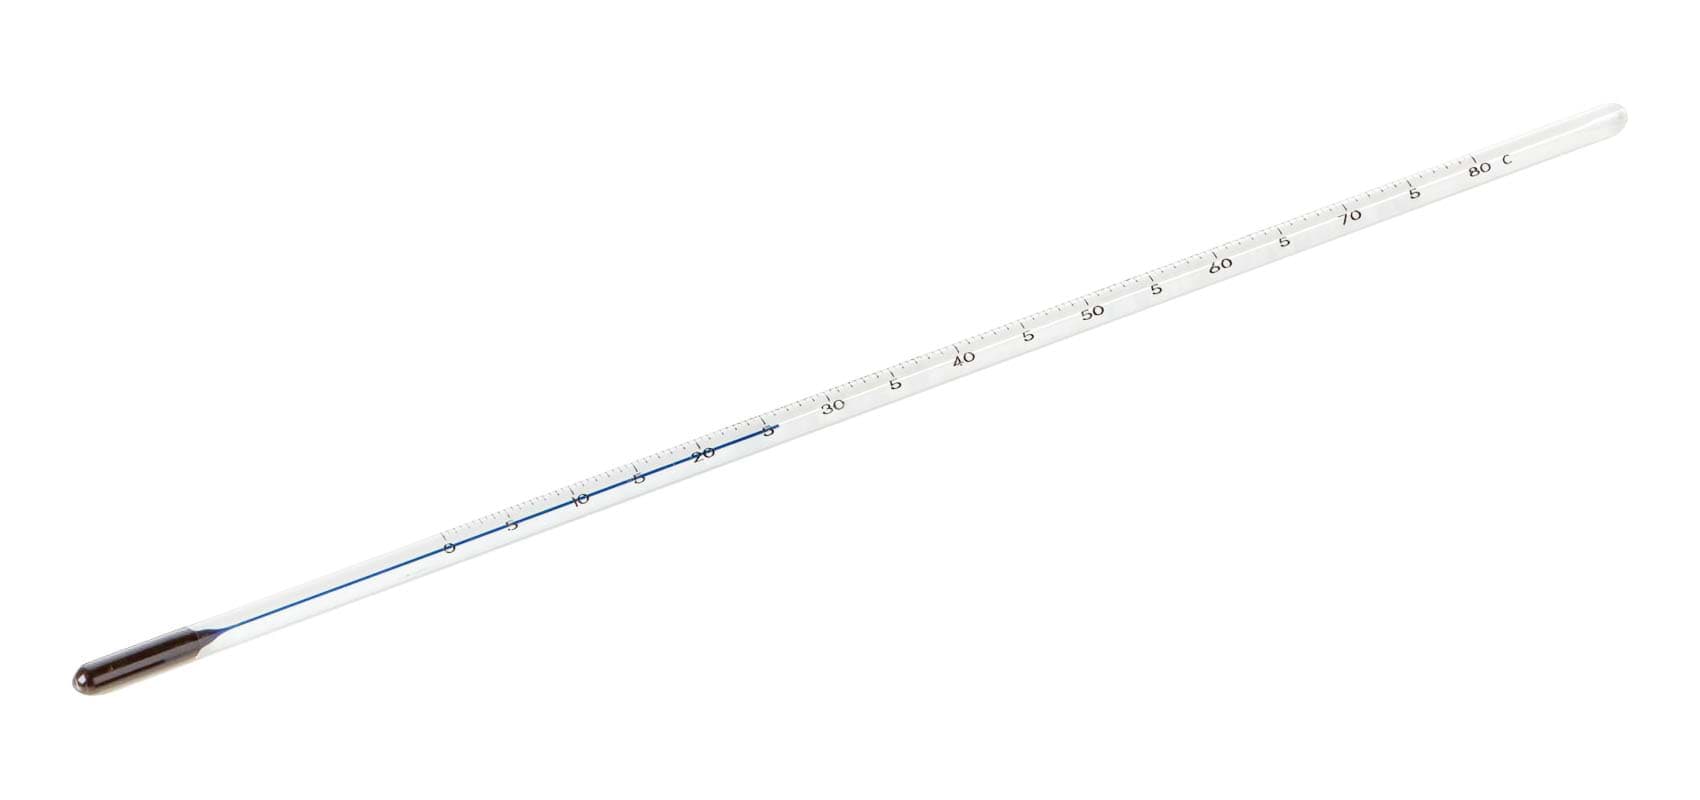 ASTM Equivalent Glass Thermometer, Non-Hazardous, Non-Certified, 14C,  Partial Immersion, SafetyBlue, Paraffin Wax Melting Point